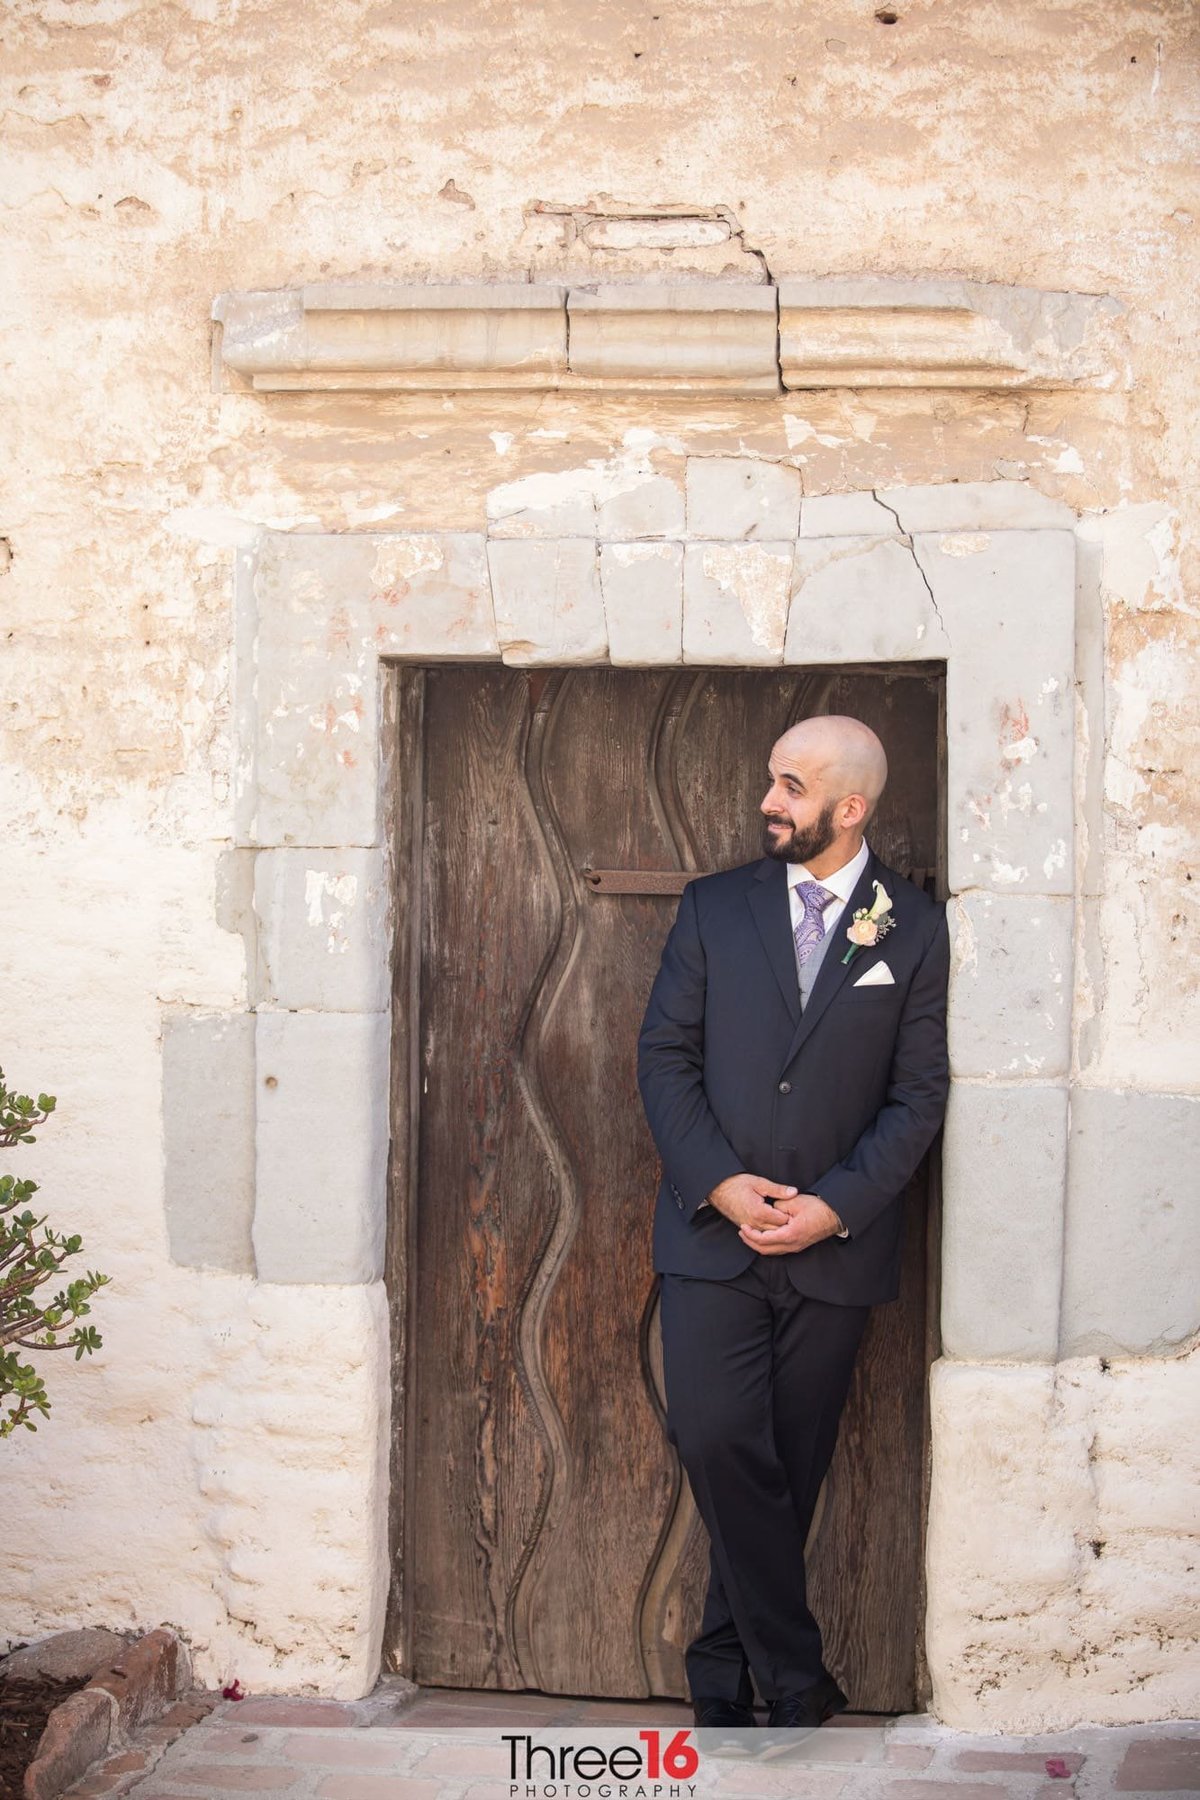 Groom leans against a door as he poses for photos